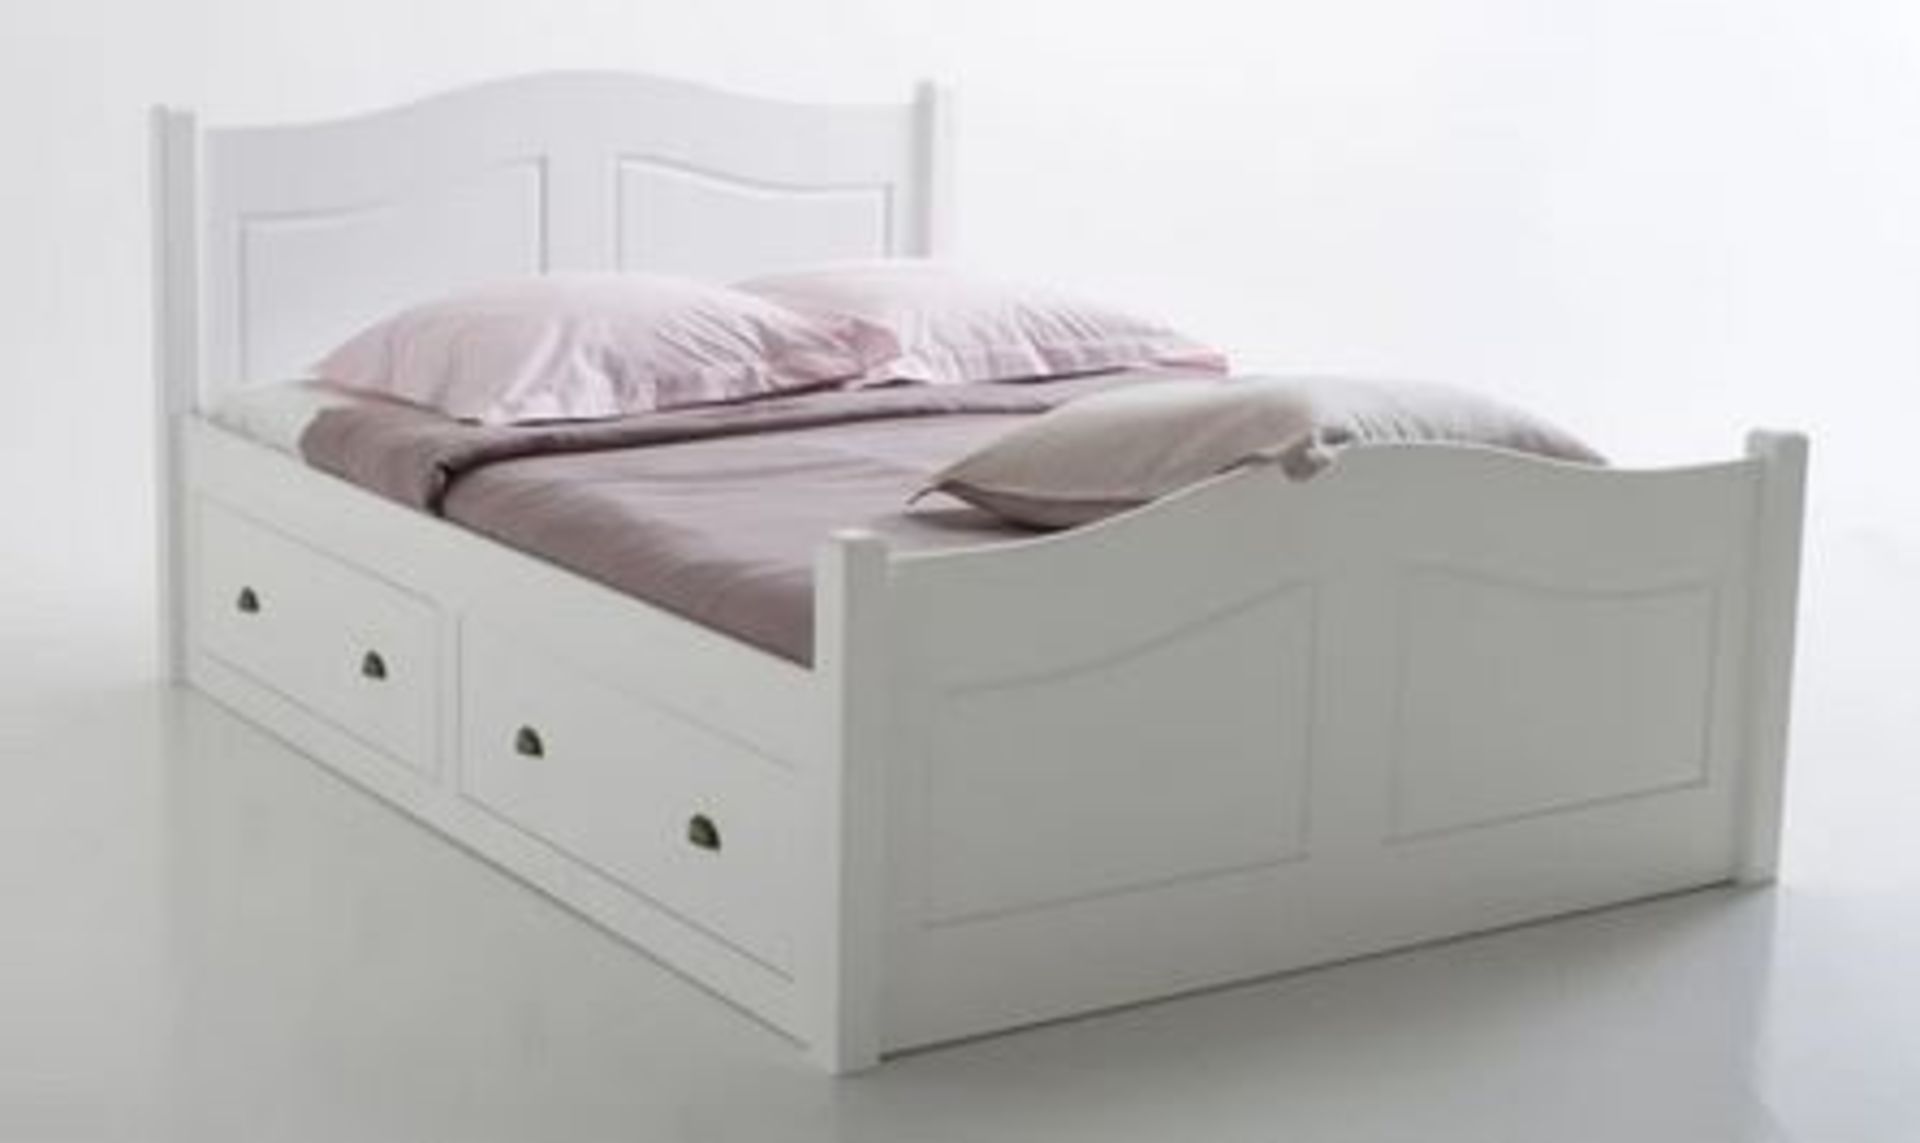 1 GRADE A BOXED DESIGNER AUTHENTIC 4 DRAWER BED IN WHITE / SIZE UNKNOWN / RRP £846.00 (PUBLIC